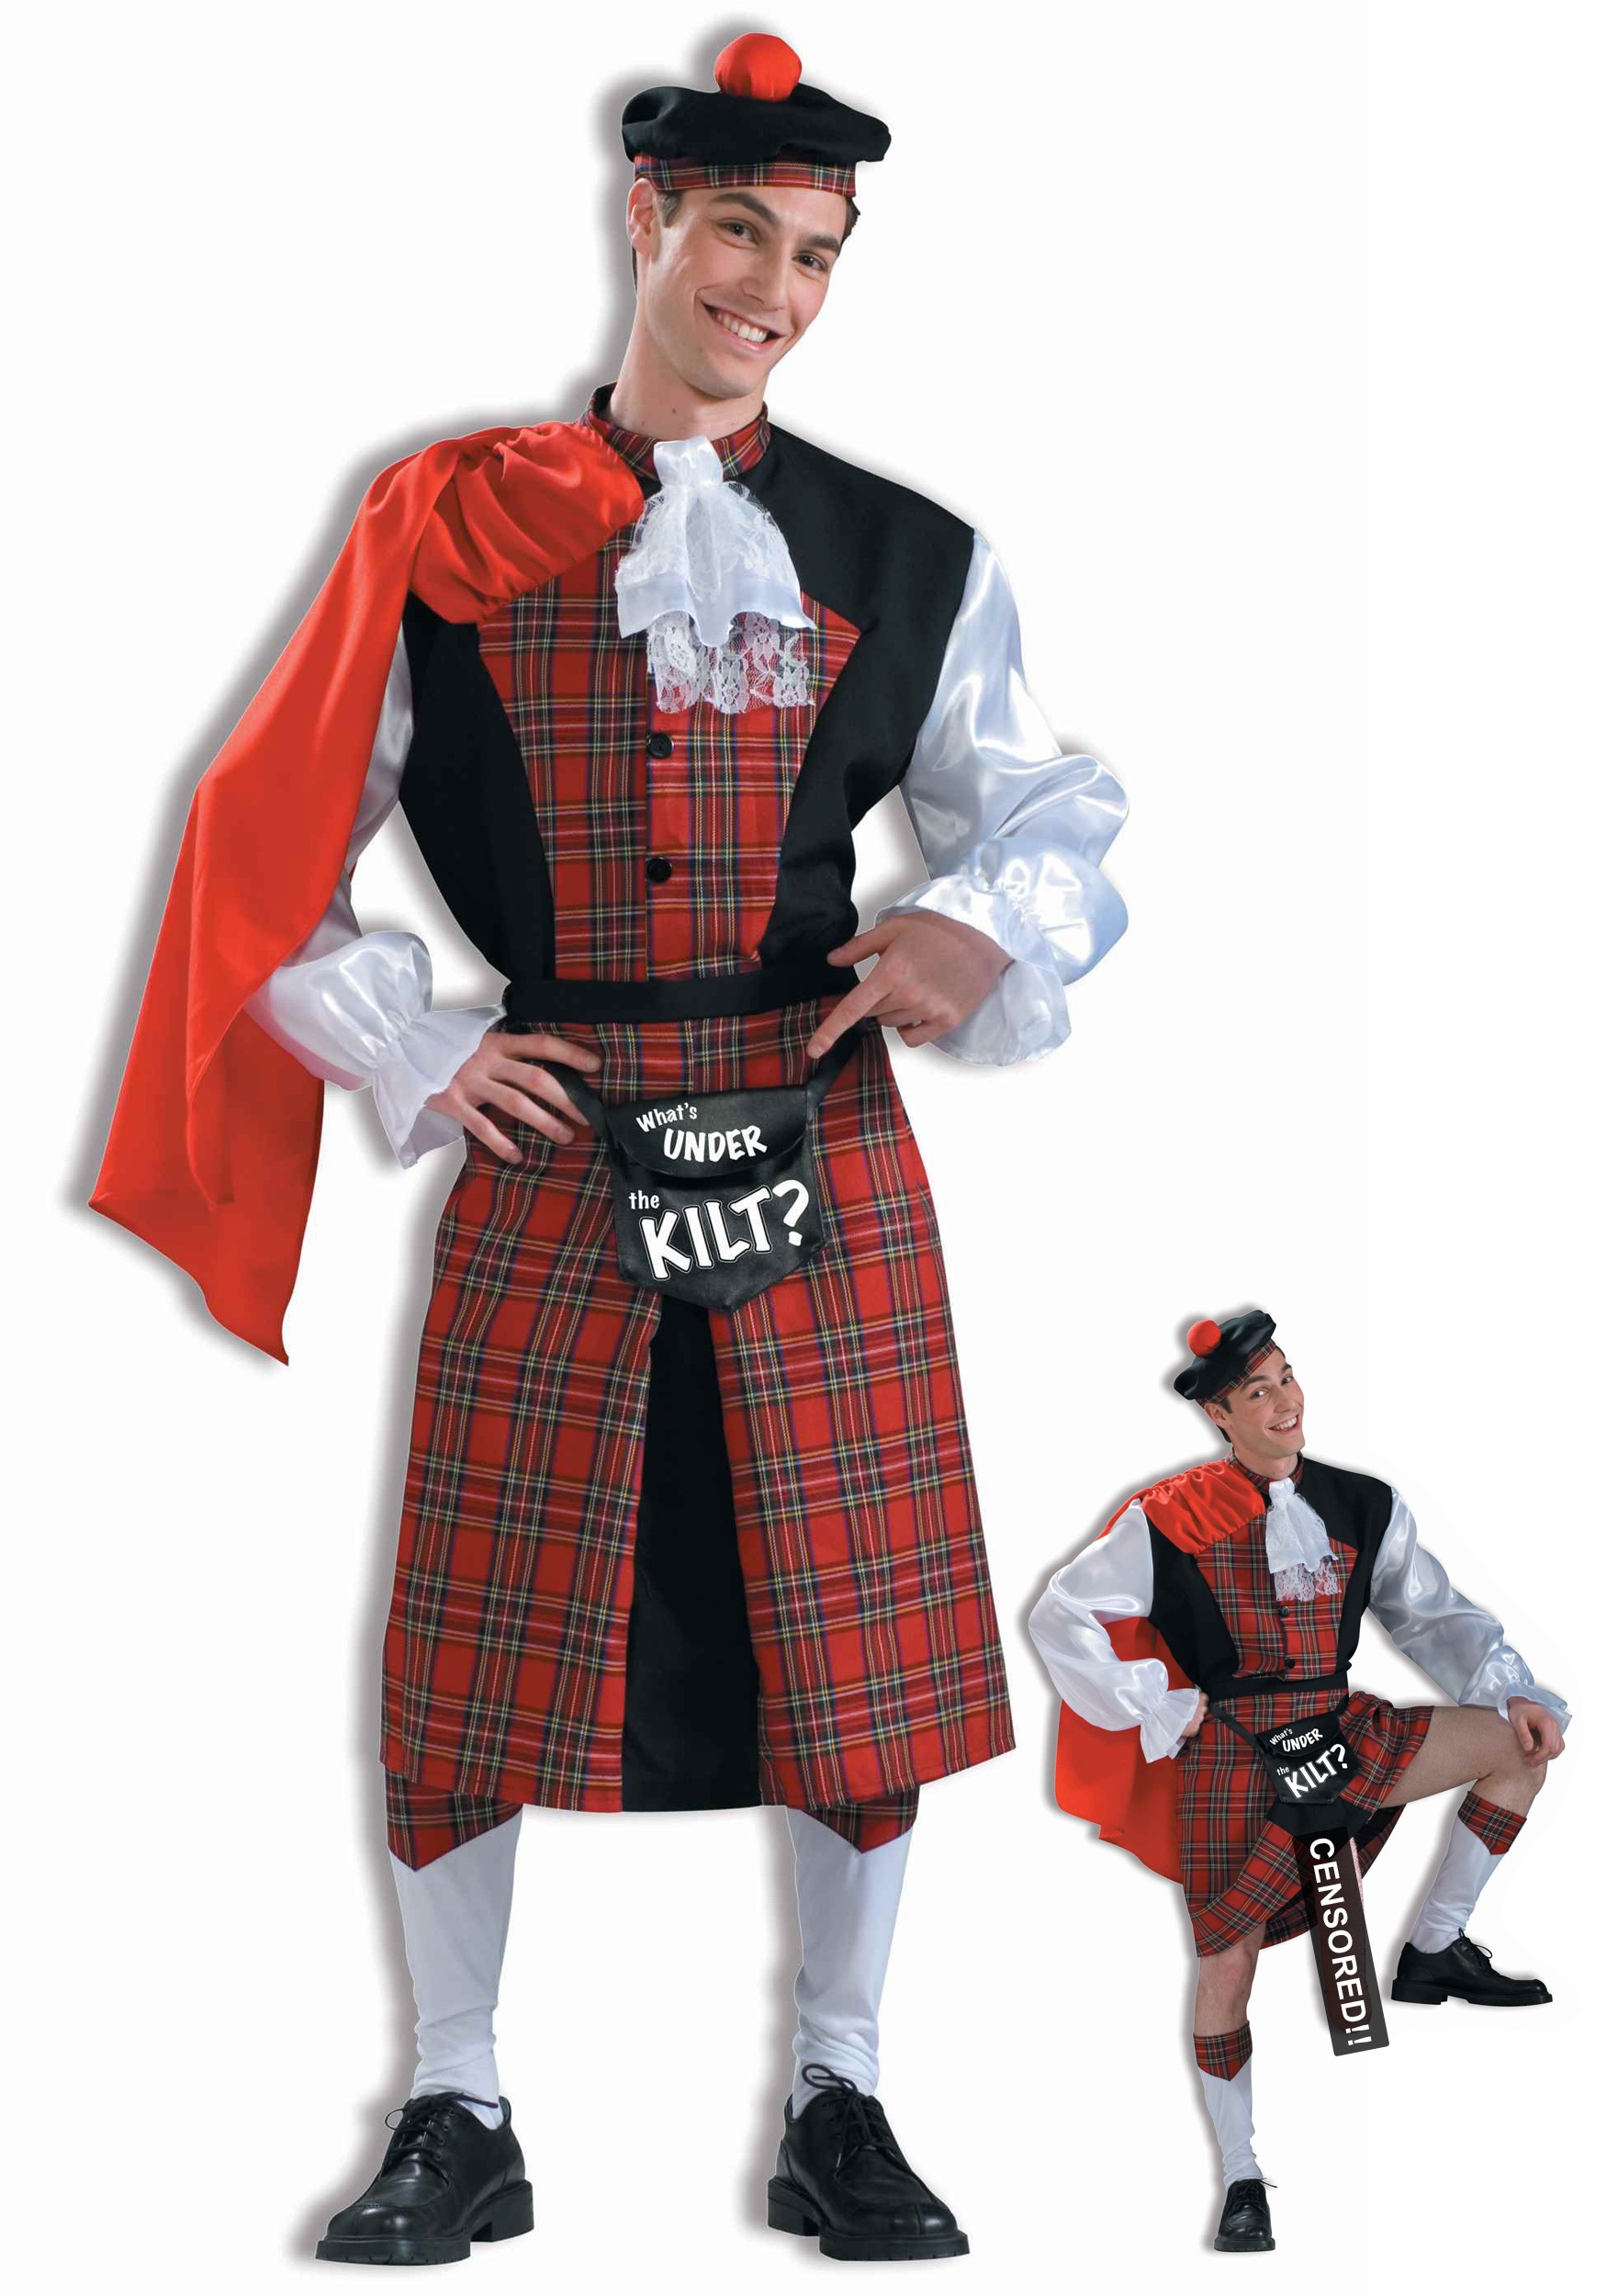 This What's Under the Kilt Costume is a funny adult humor costume larg...